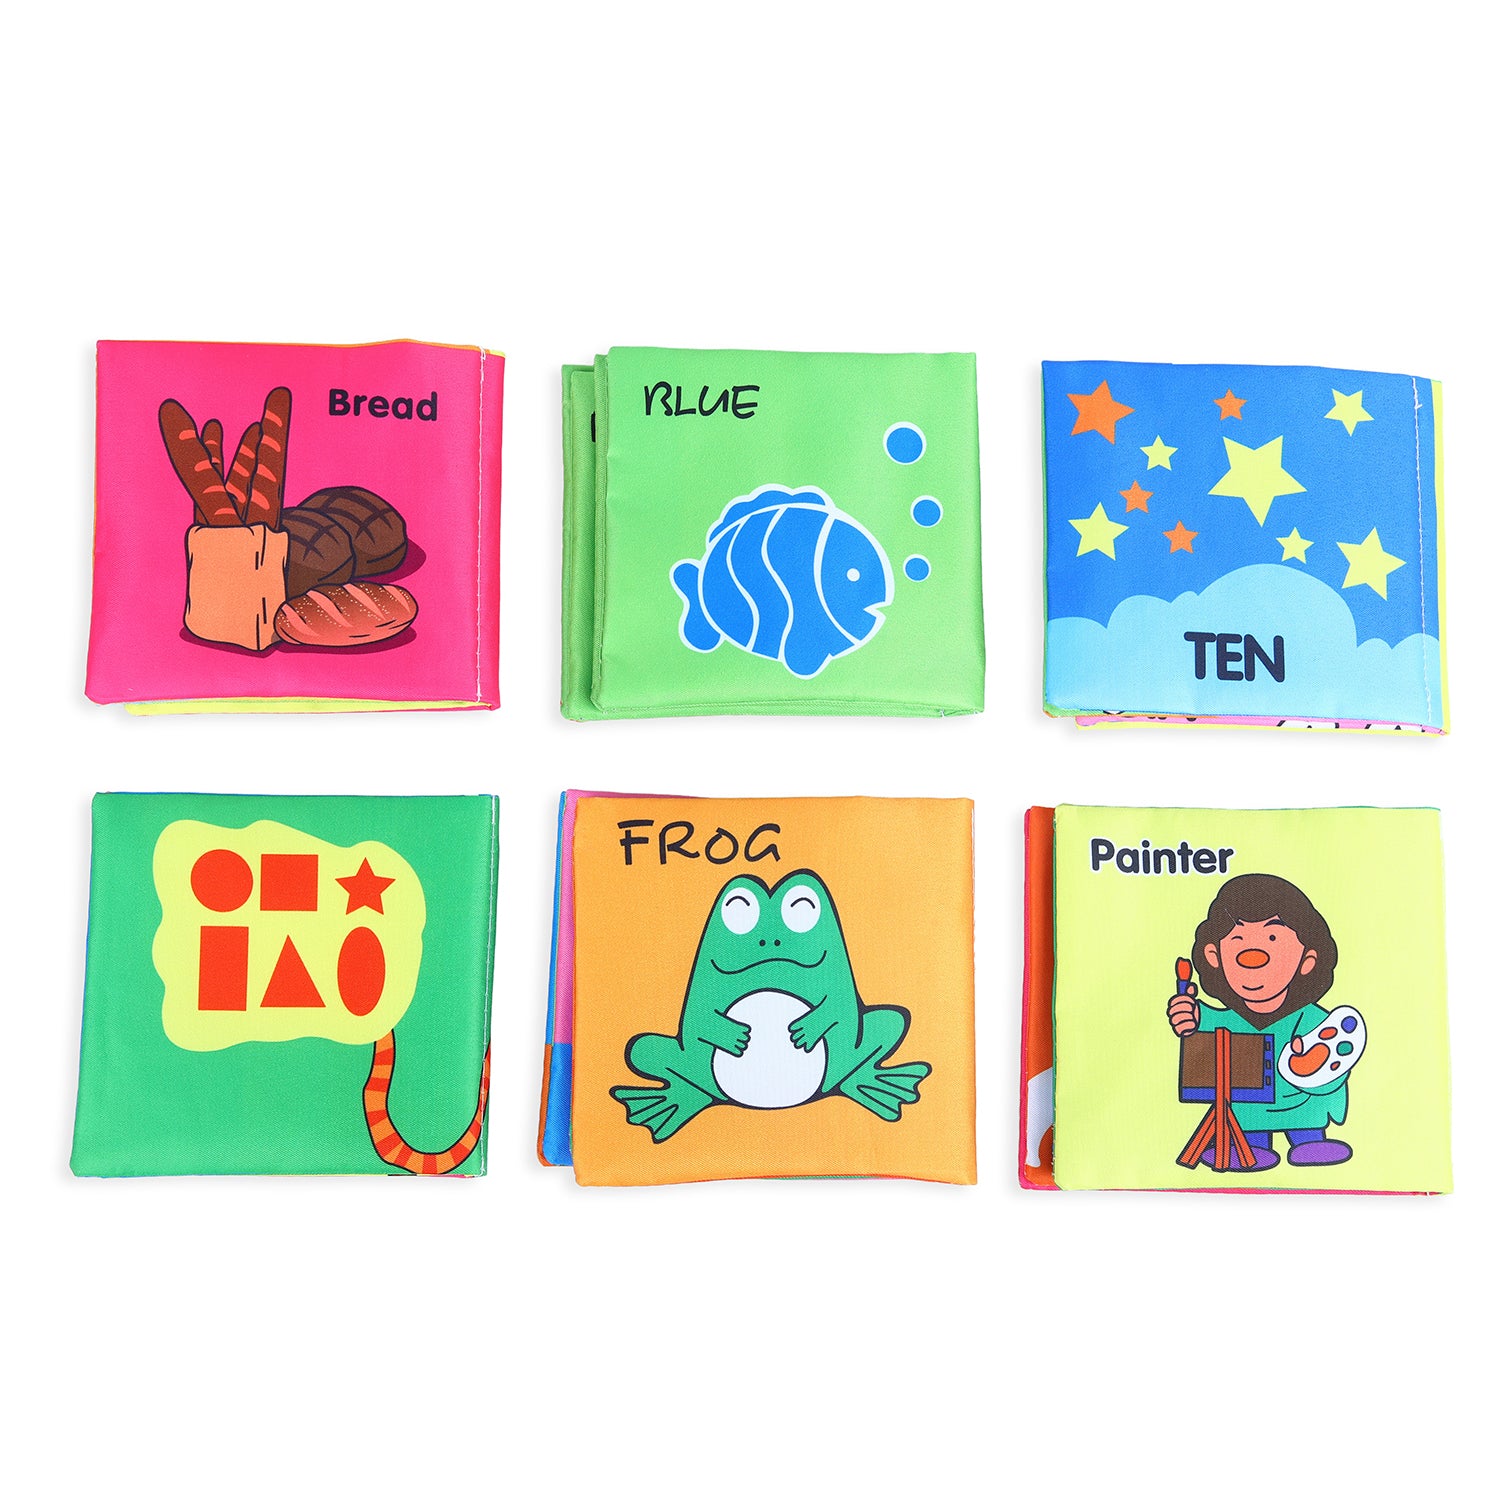 Numbers Animals Shapes Colours Food Occupations Baby Educational Cloth Book with Sound Paper Set of 6 - Multicolour